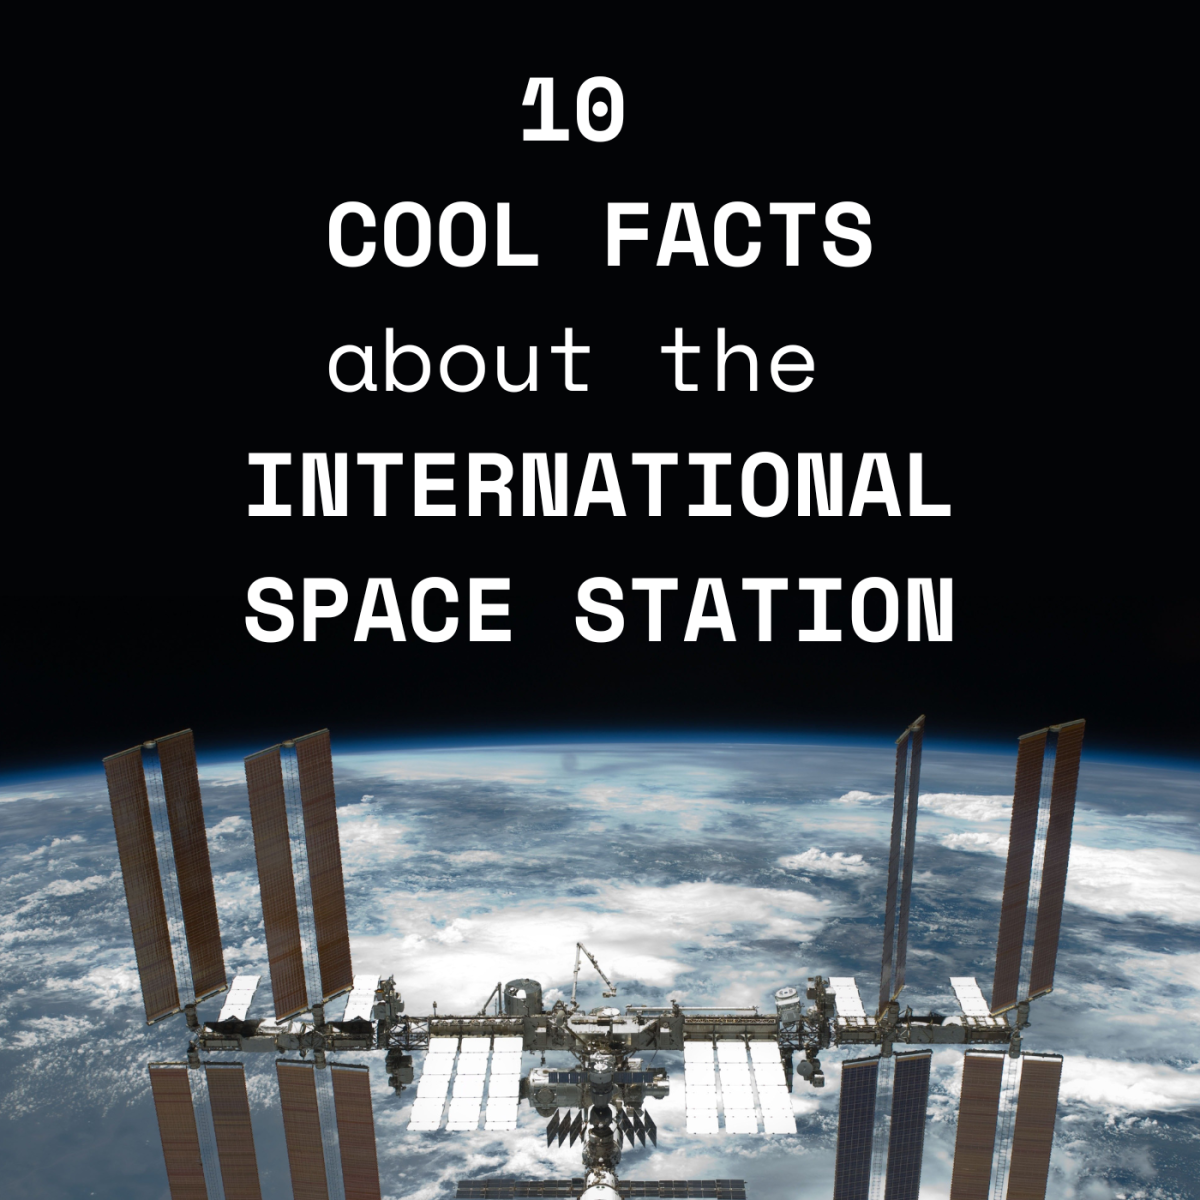 10 Unusual Facts About the International Space Station